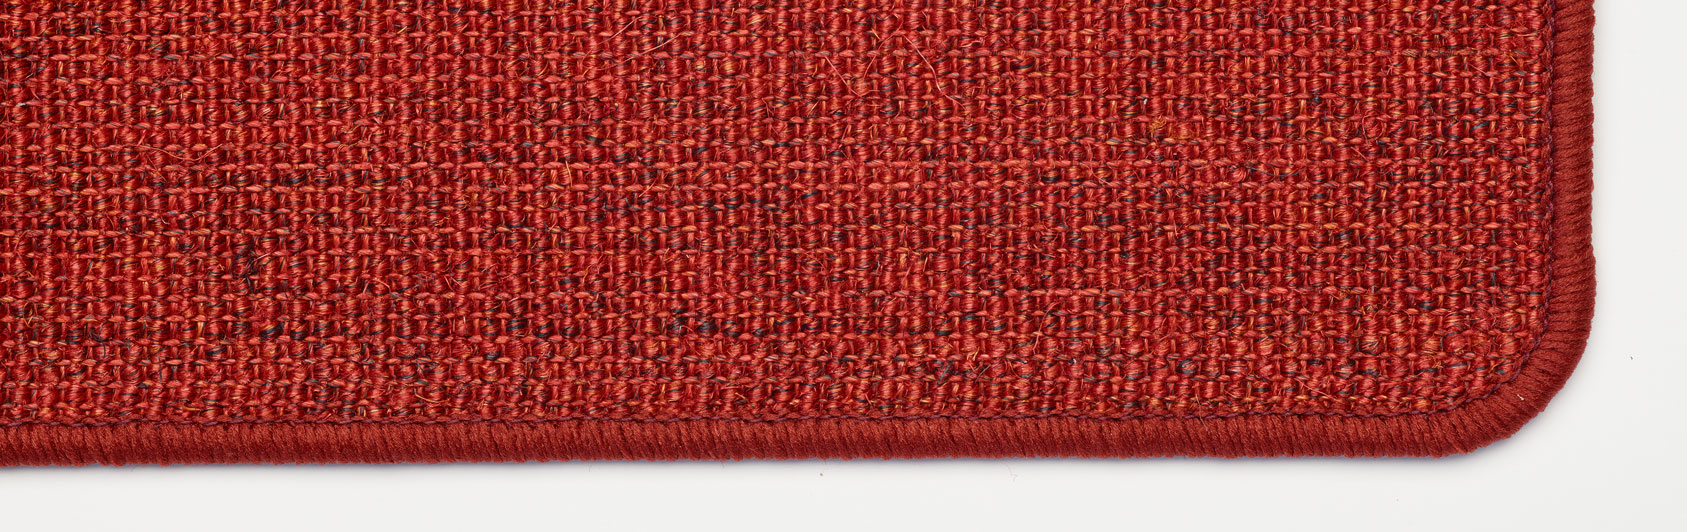 church carpet sisal color red color code 7401